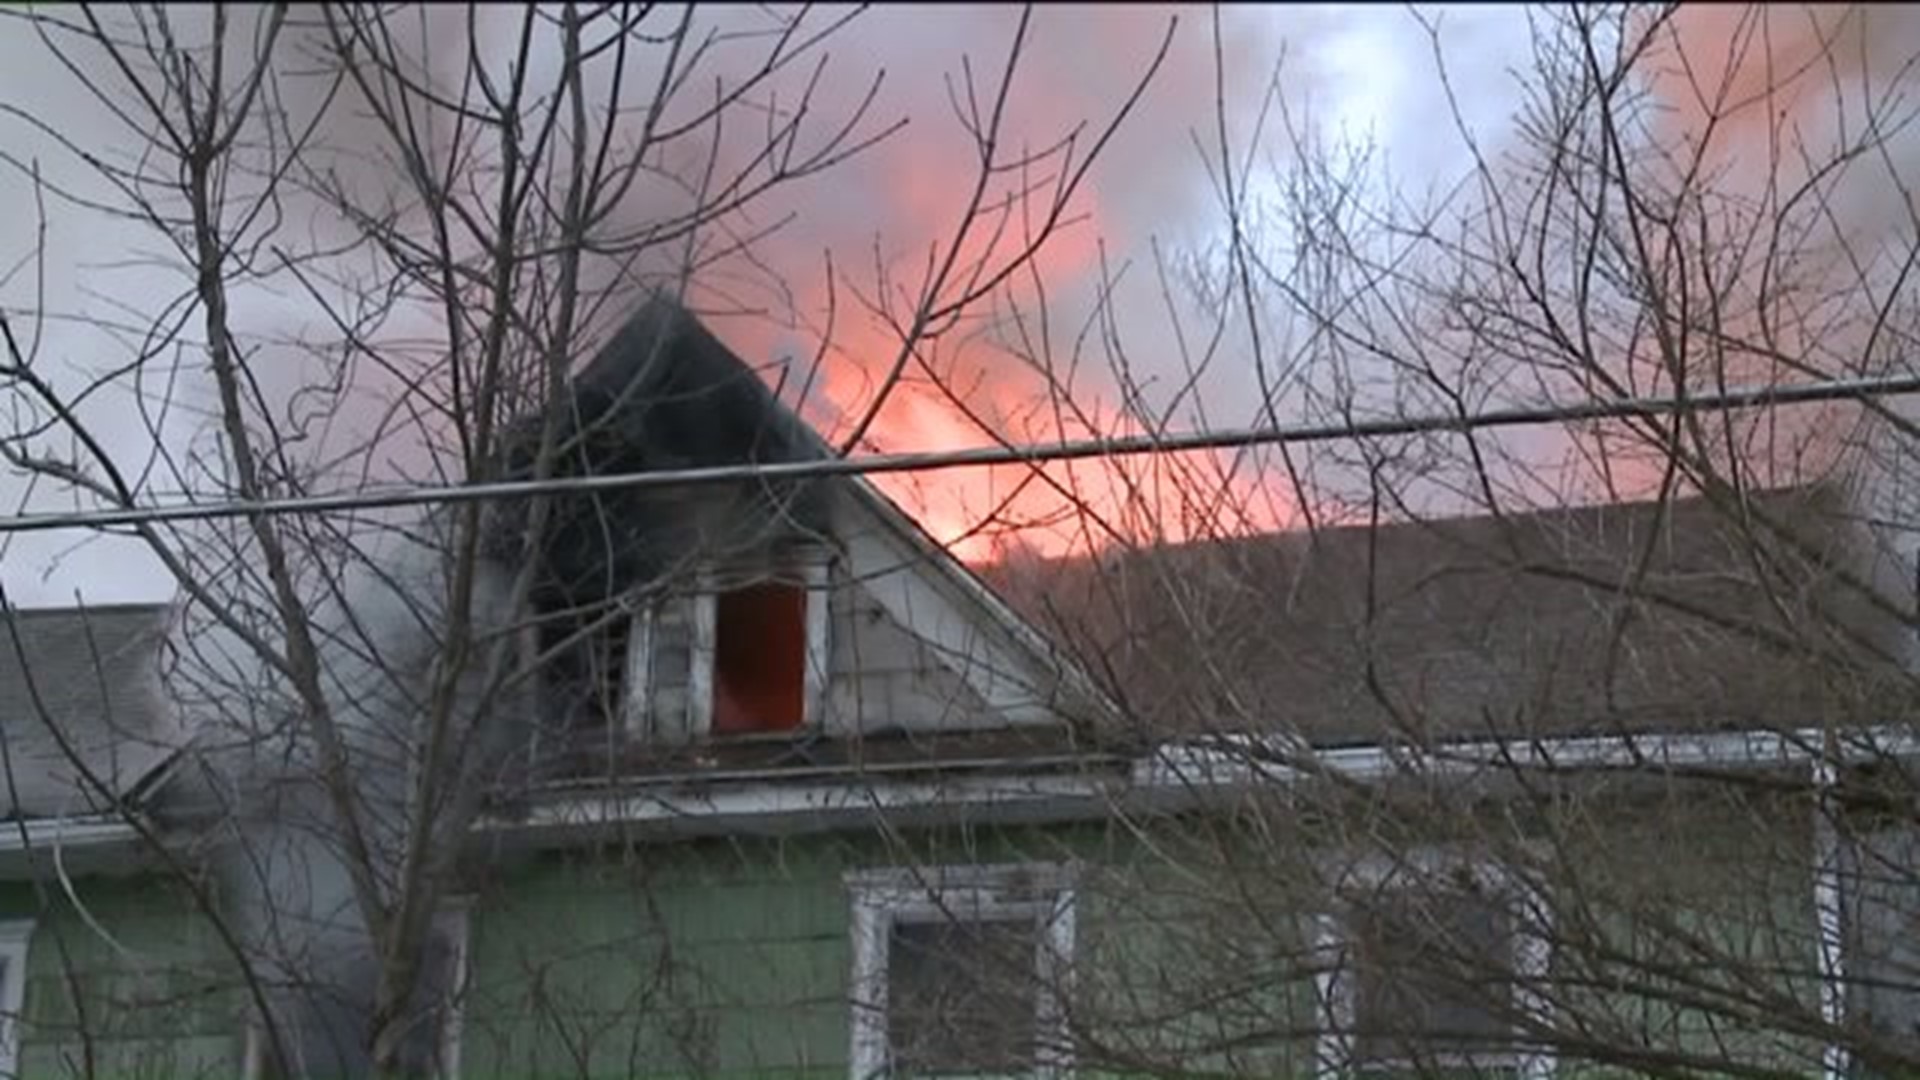 Couple Loses Home to Blaze as Firefighters Battle Flames and Freezing Temps